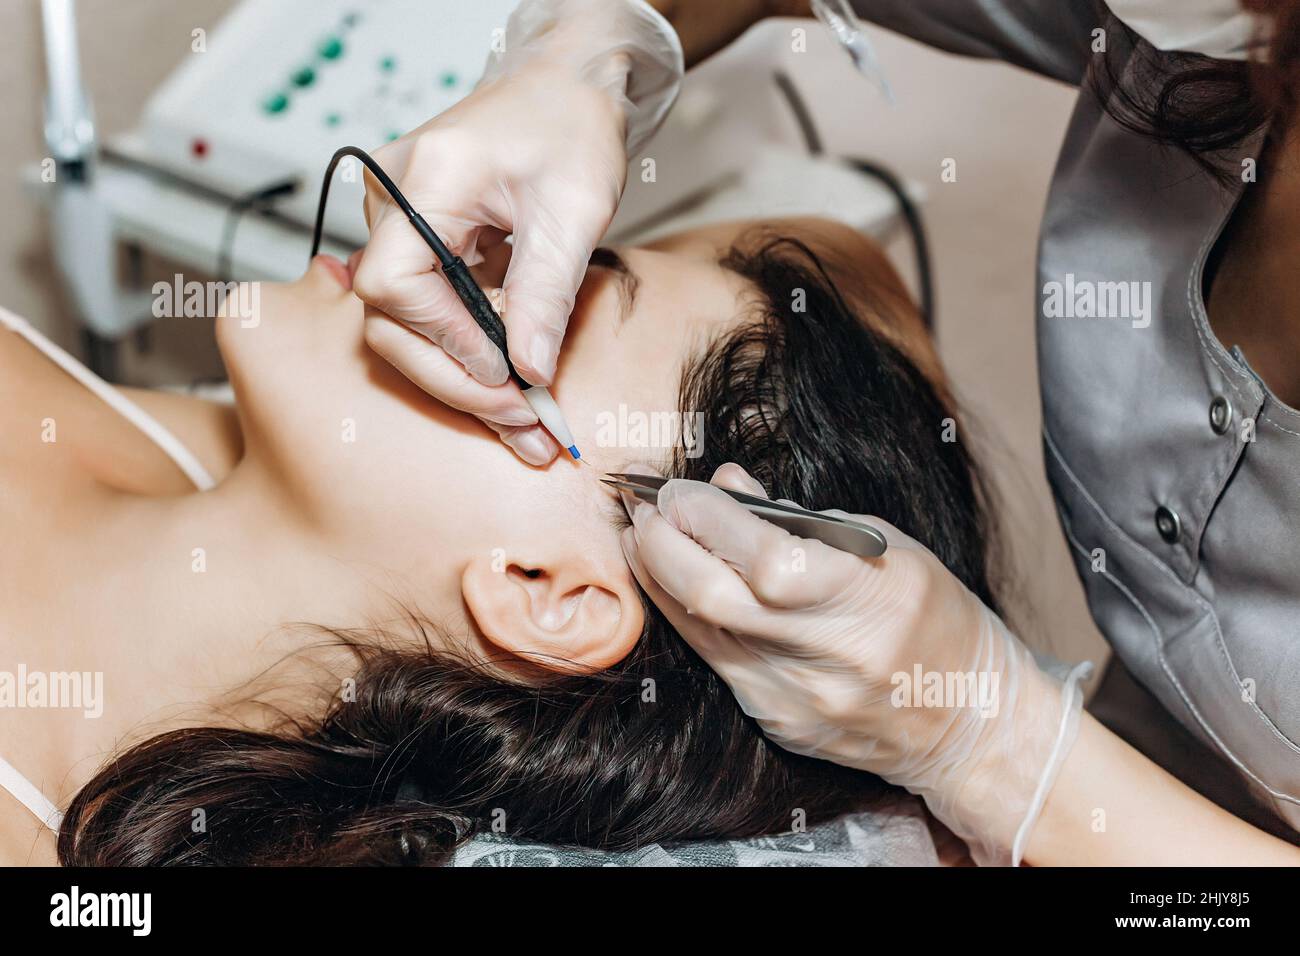 The process of permanent removal of unwanted facial hair using an electroepilation device and tweezers. Stock Photo